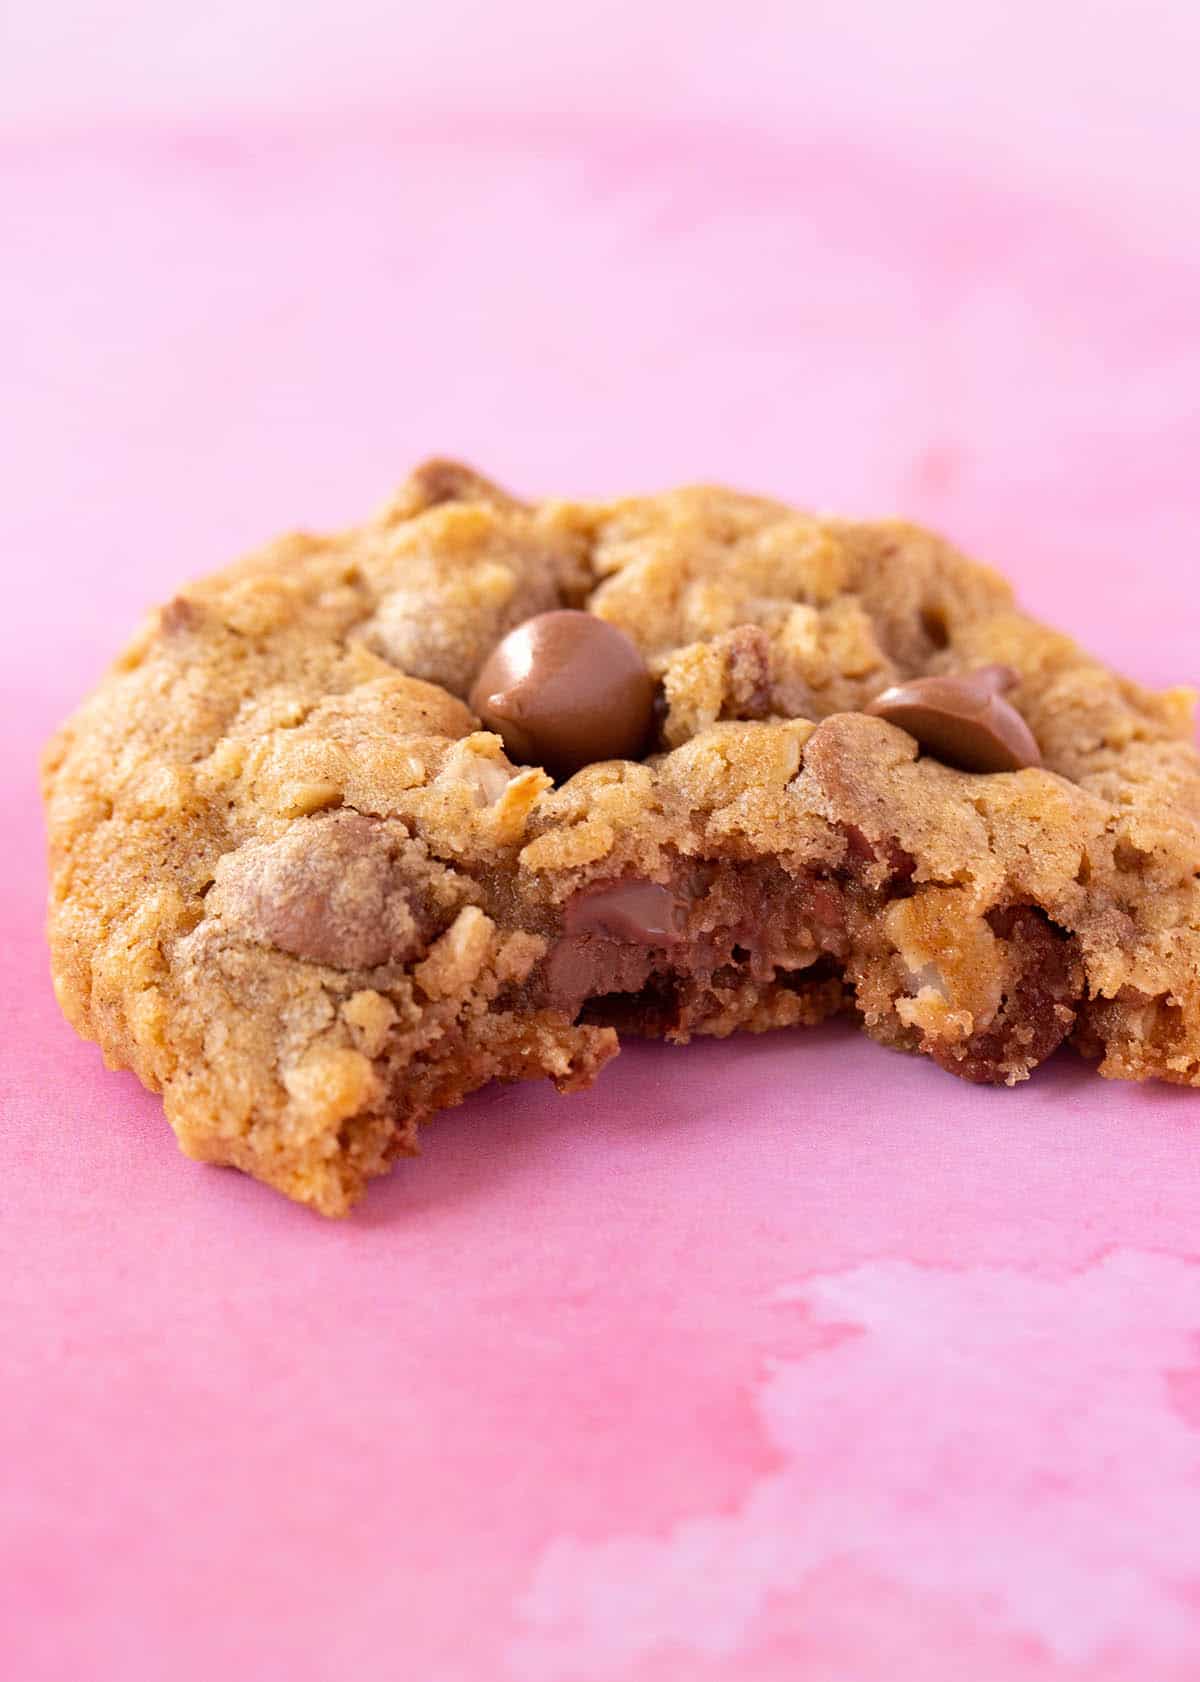 A close up of a chewy Oatmeal Chocolate Chip Cookie on a pink background.